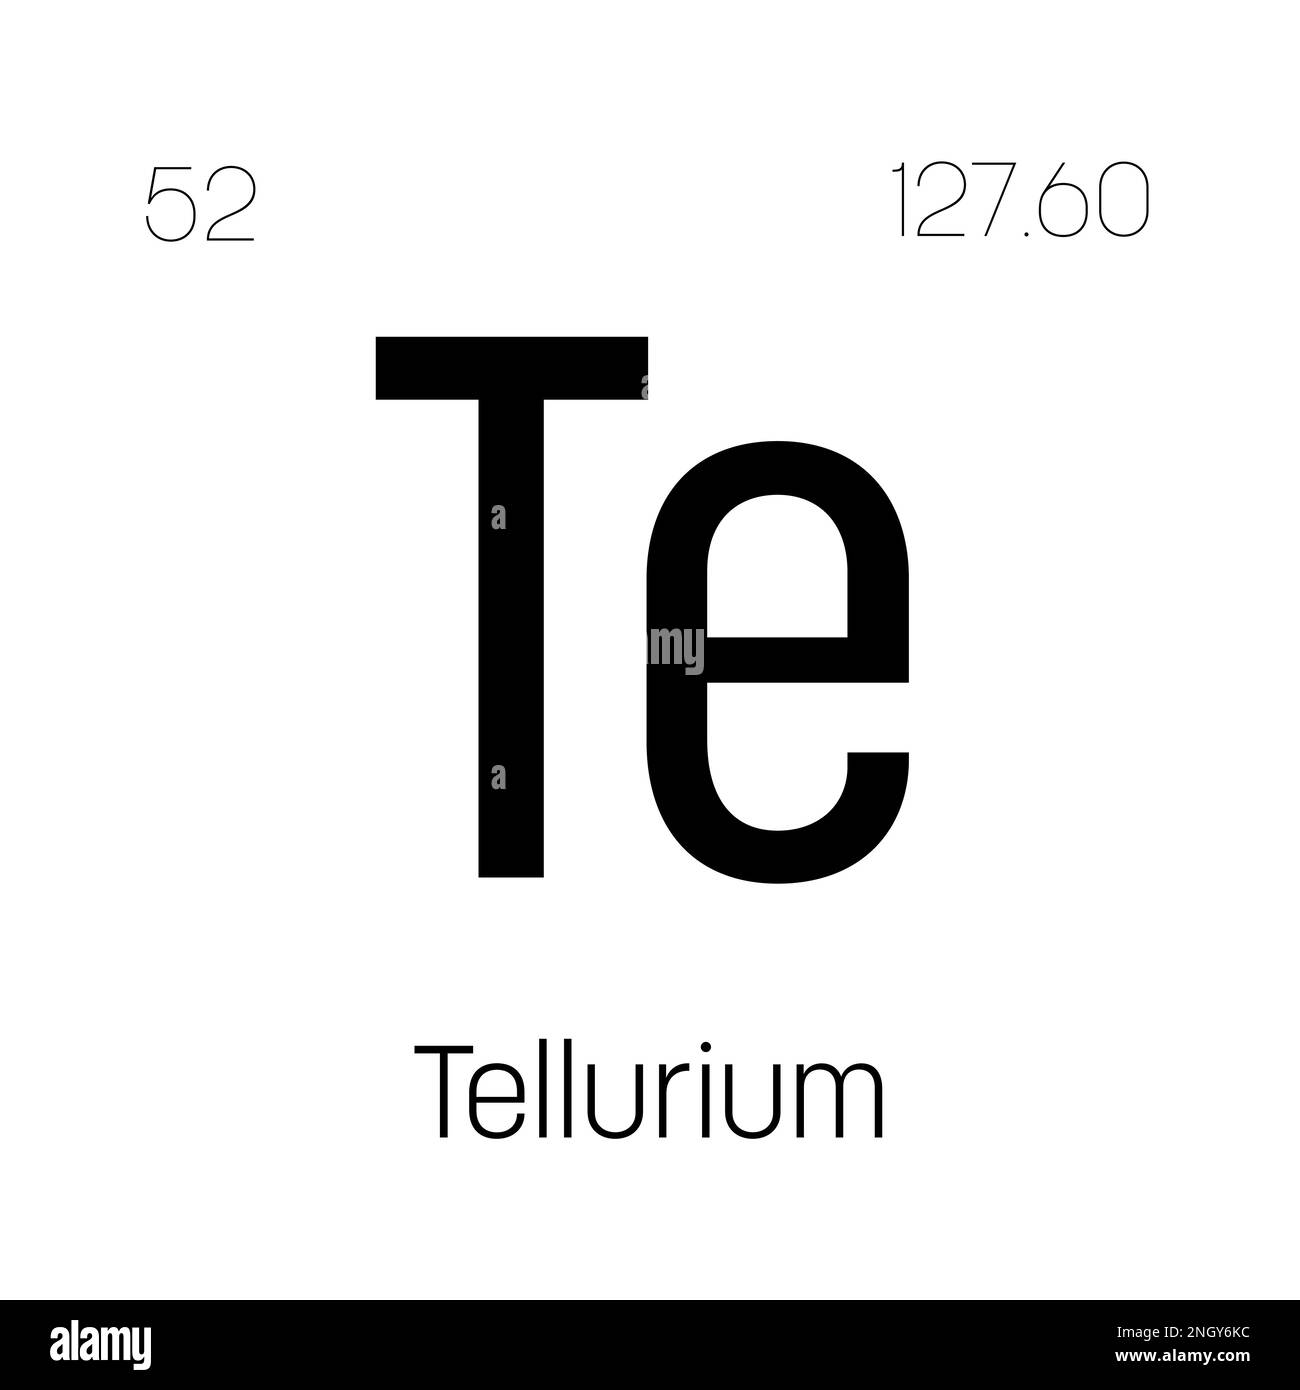 Tellurium, Te, periodic table element with name, symbol, atomic number and weight. Metalloid with various industrial uses, such as in certain types of glass, solar cells, and as a component in certain types of medication. Stock Vector